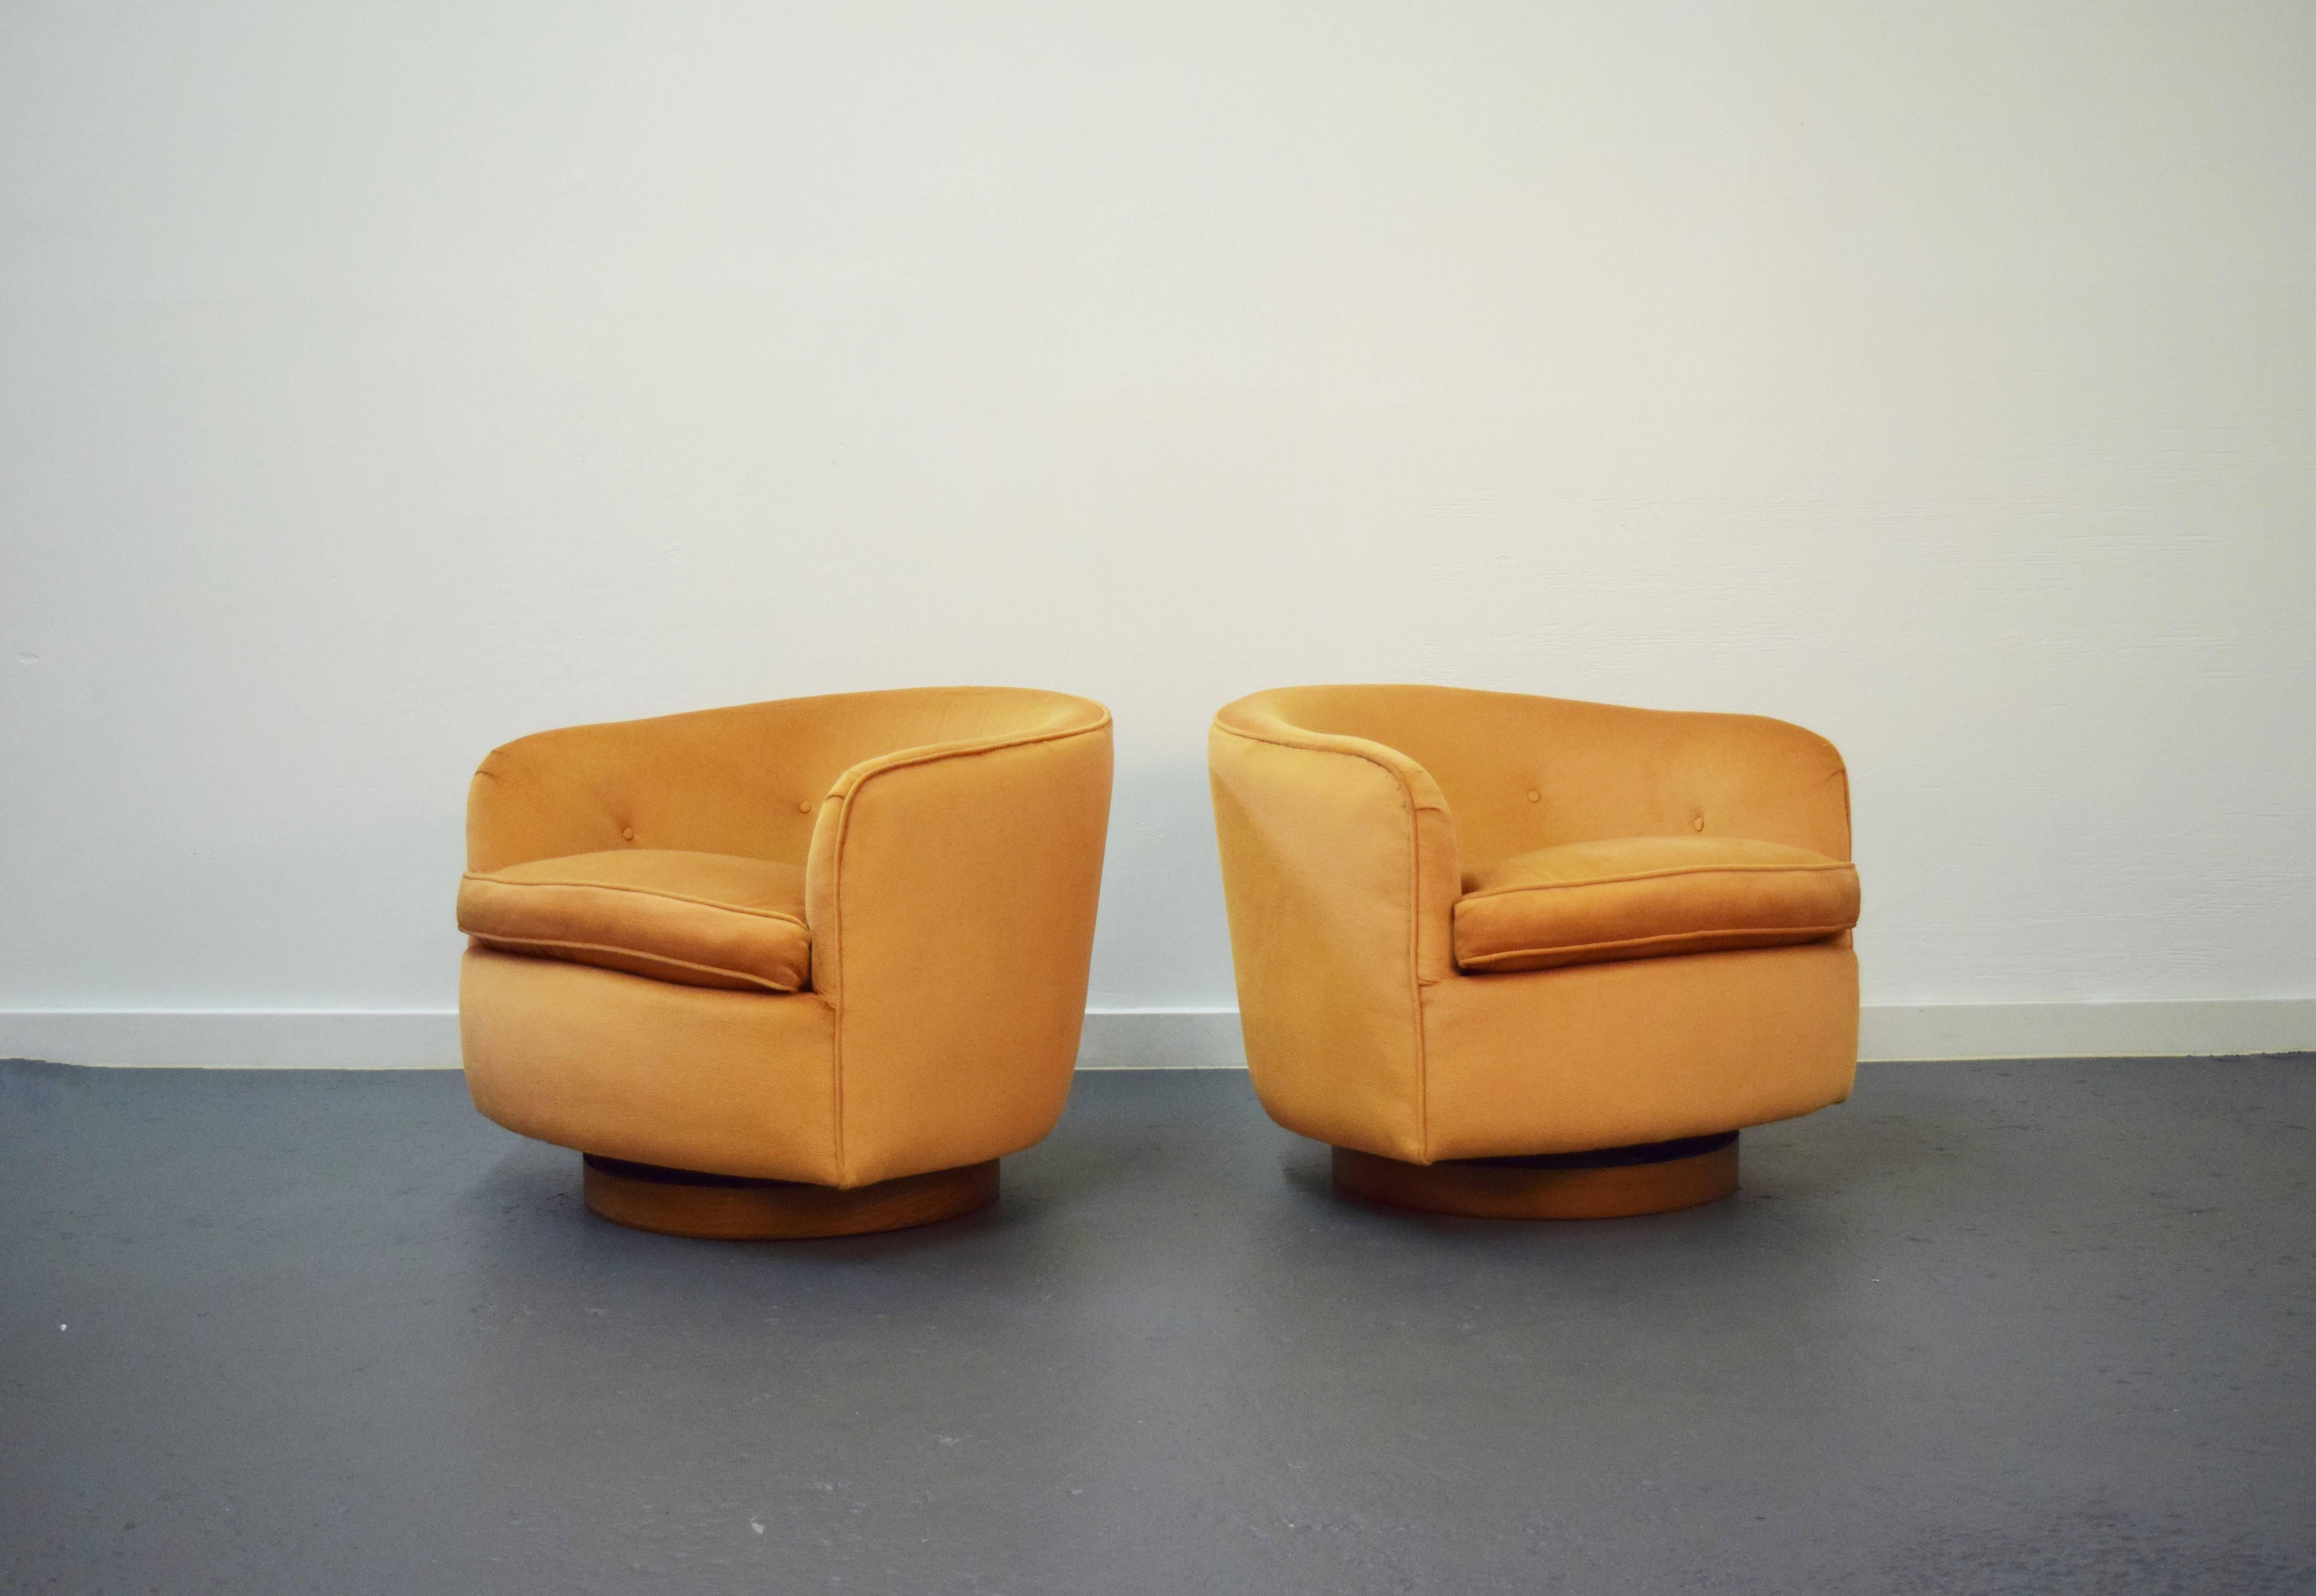 Pair of Milo Baughman swivel lounge chairs. Chairs sit on walnut bases, swivel, and tilt.